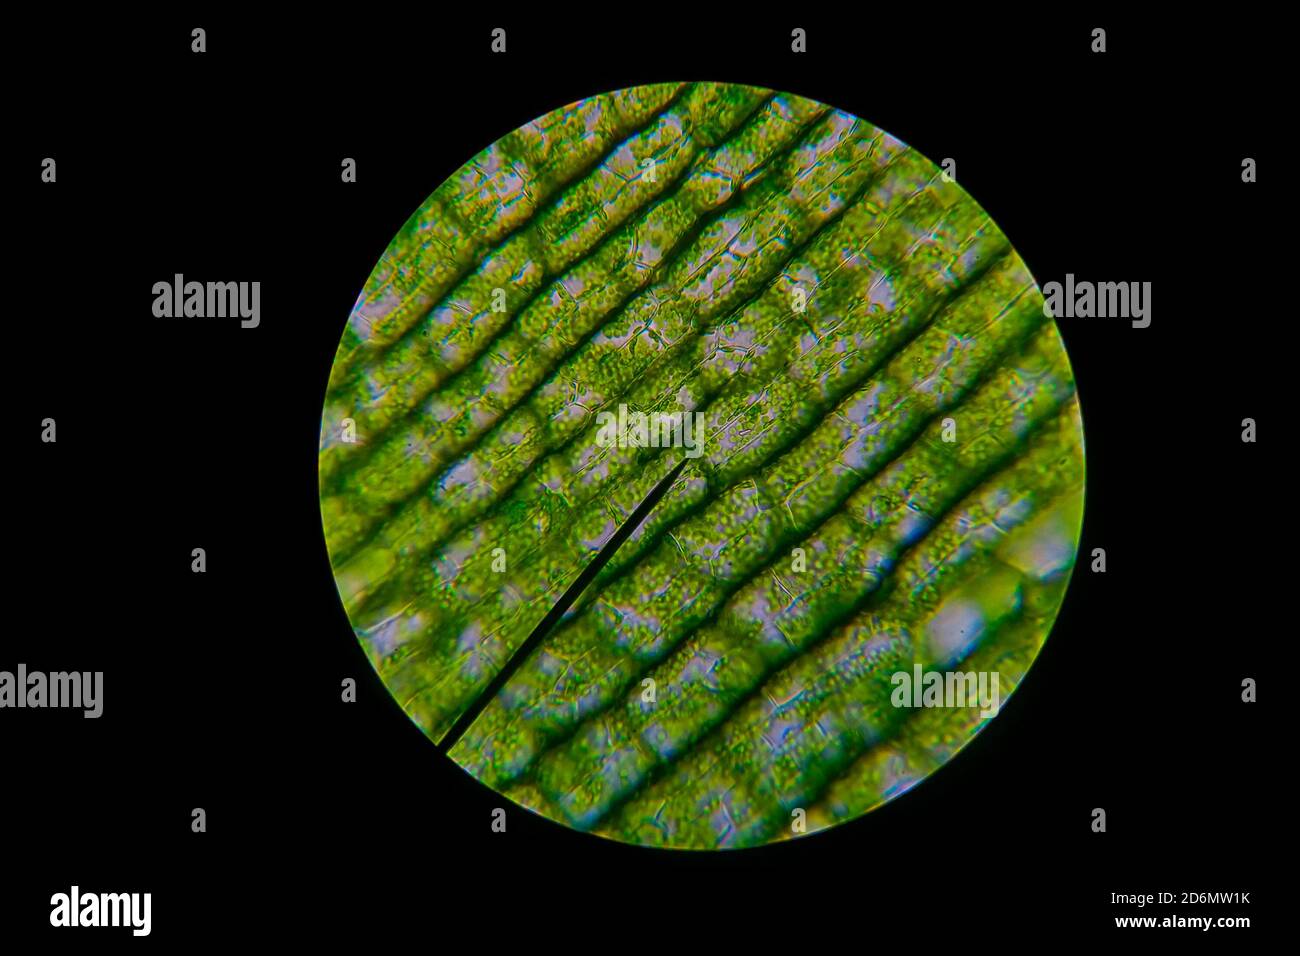 Green leaf grains also known as chloroplasts in cells of a waterweed seen through a microscope. Biology experiment. Stock Photo